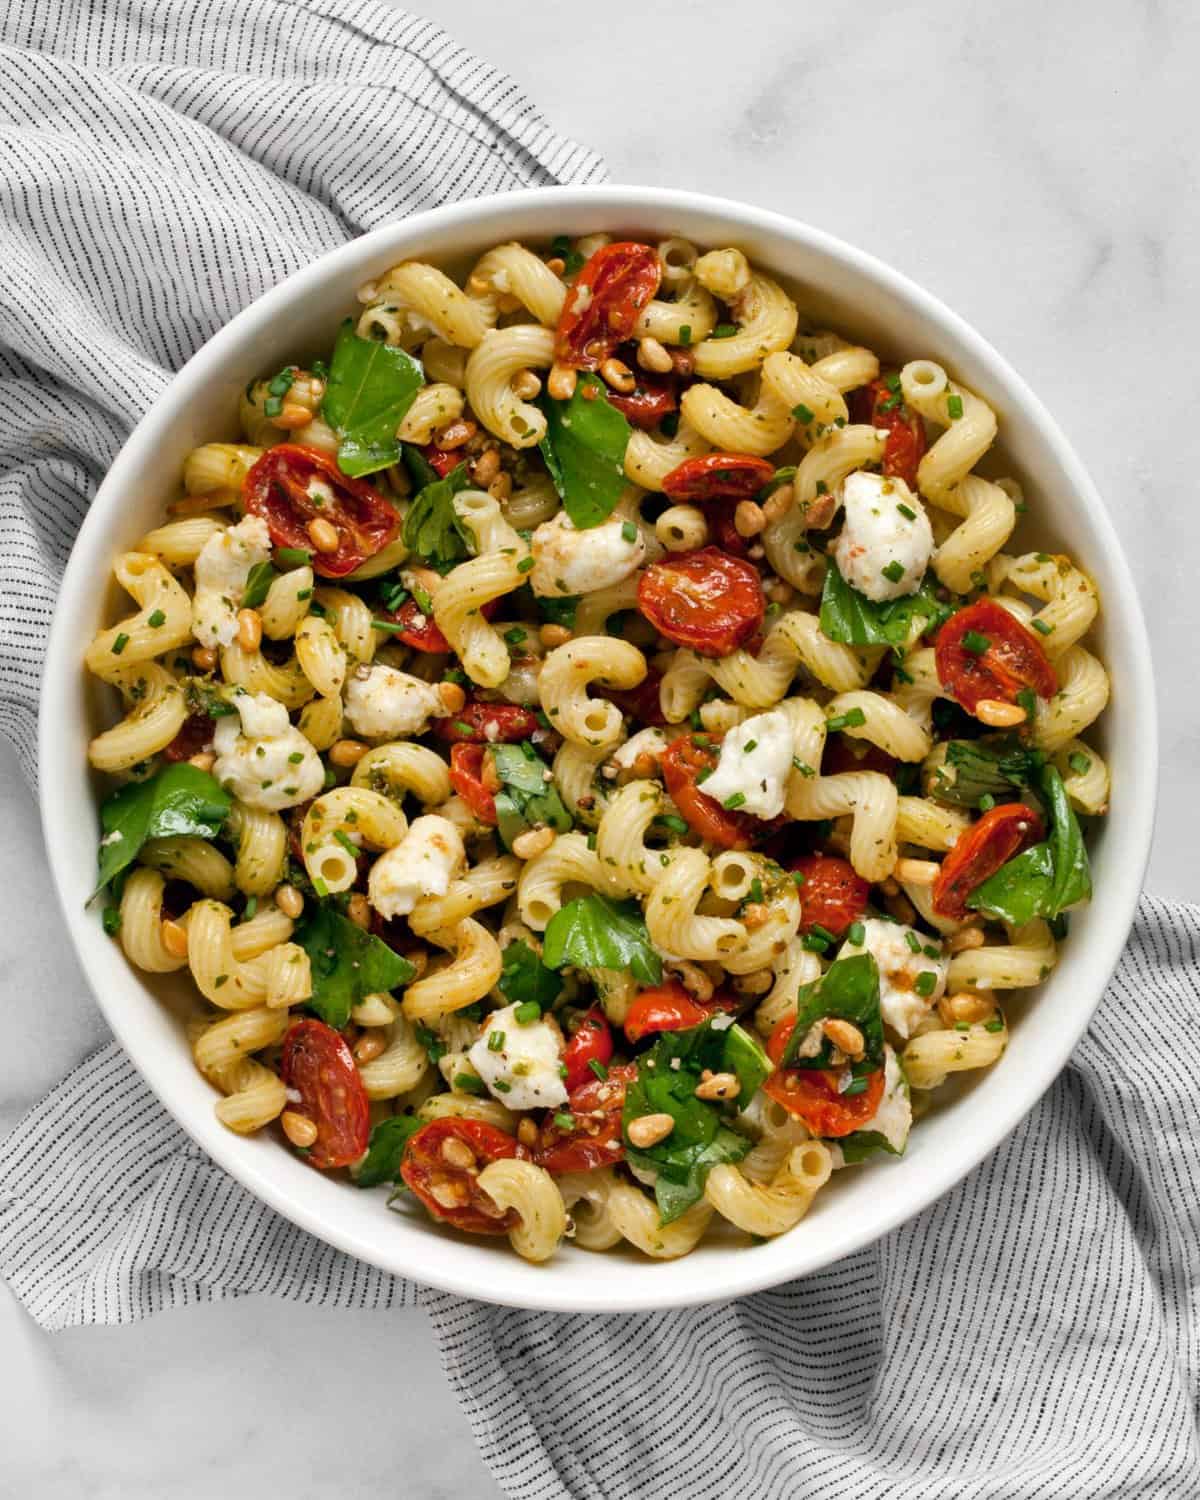 Pesto pasta salad with roasted tomatoes and mozzarella in a bowl.